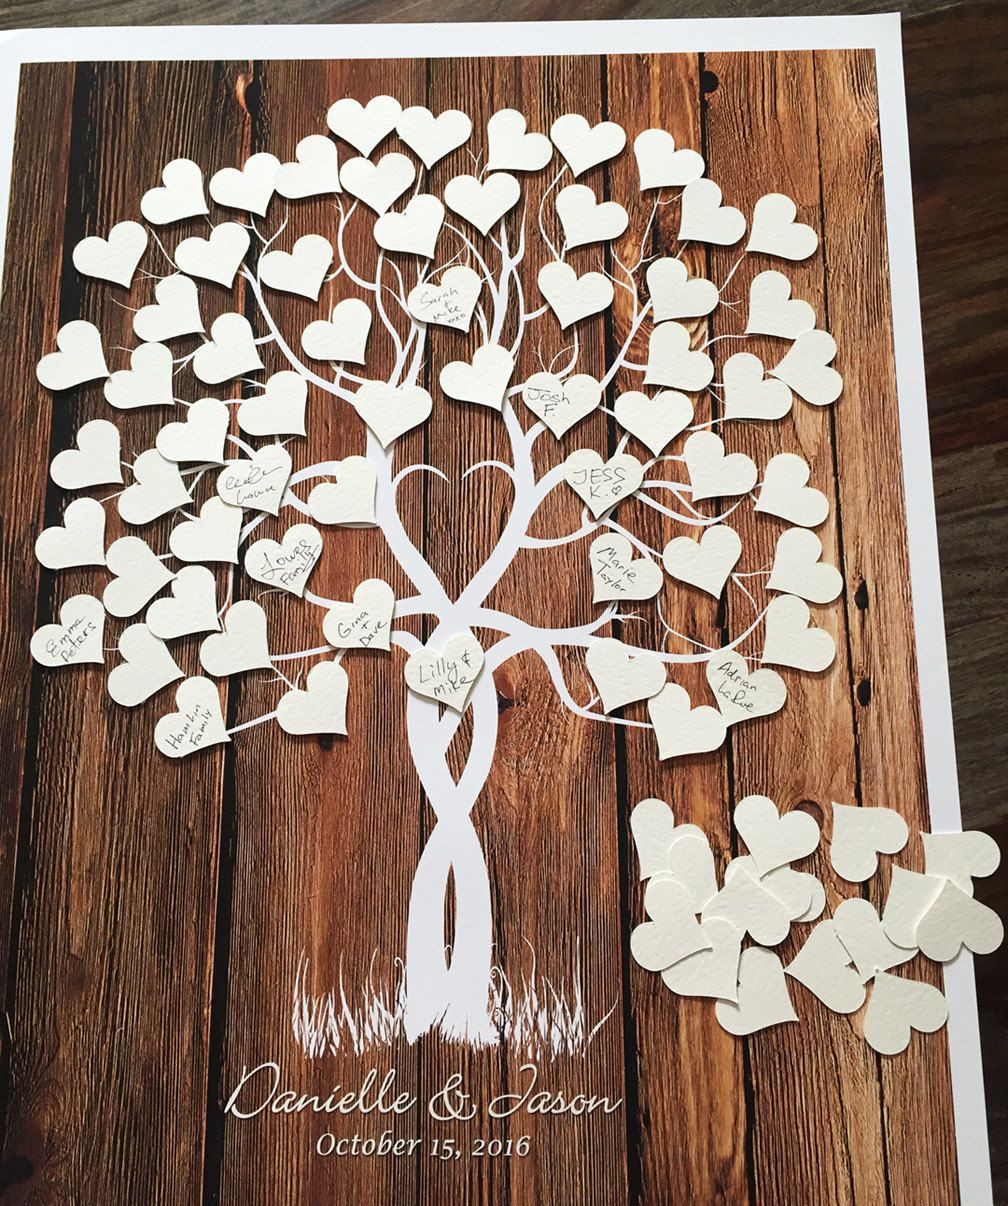 Wooden Tree Wedding Guest Book
 Wedding Tree guestbook Alternative with Adhesive Hearts